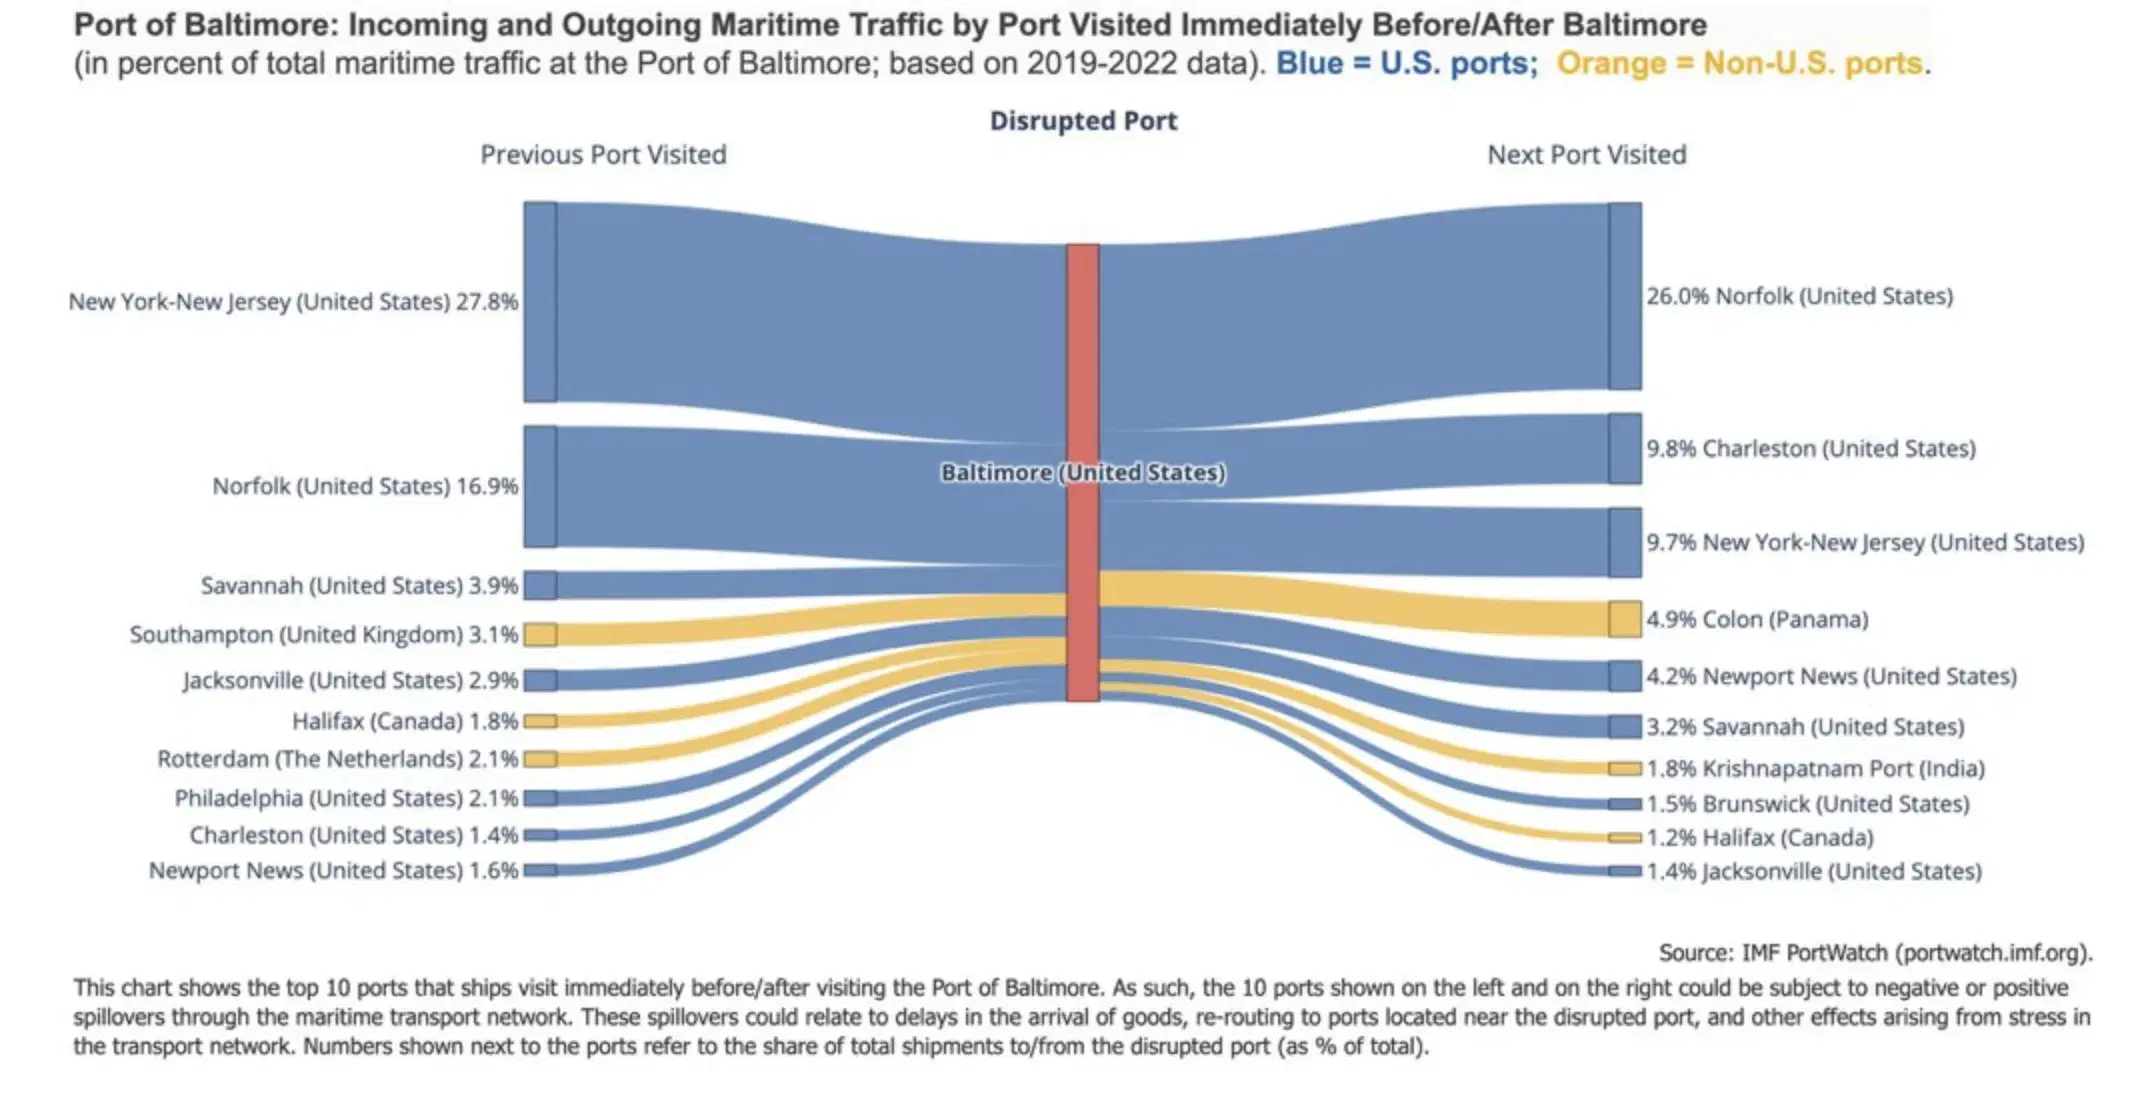 Port of Baltimore: Incoming and Outgoing Maritime Traffic